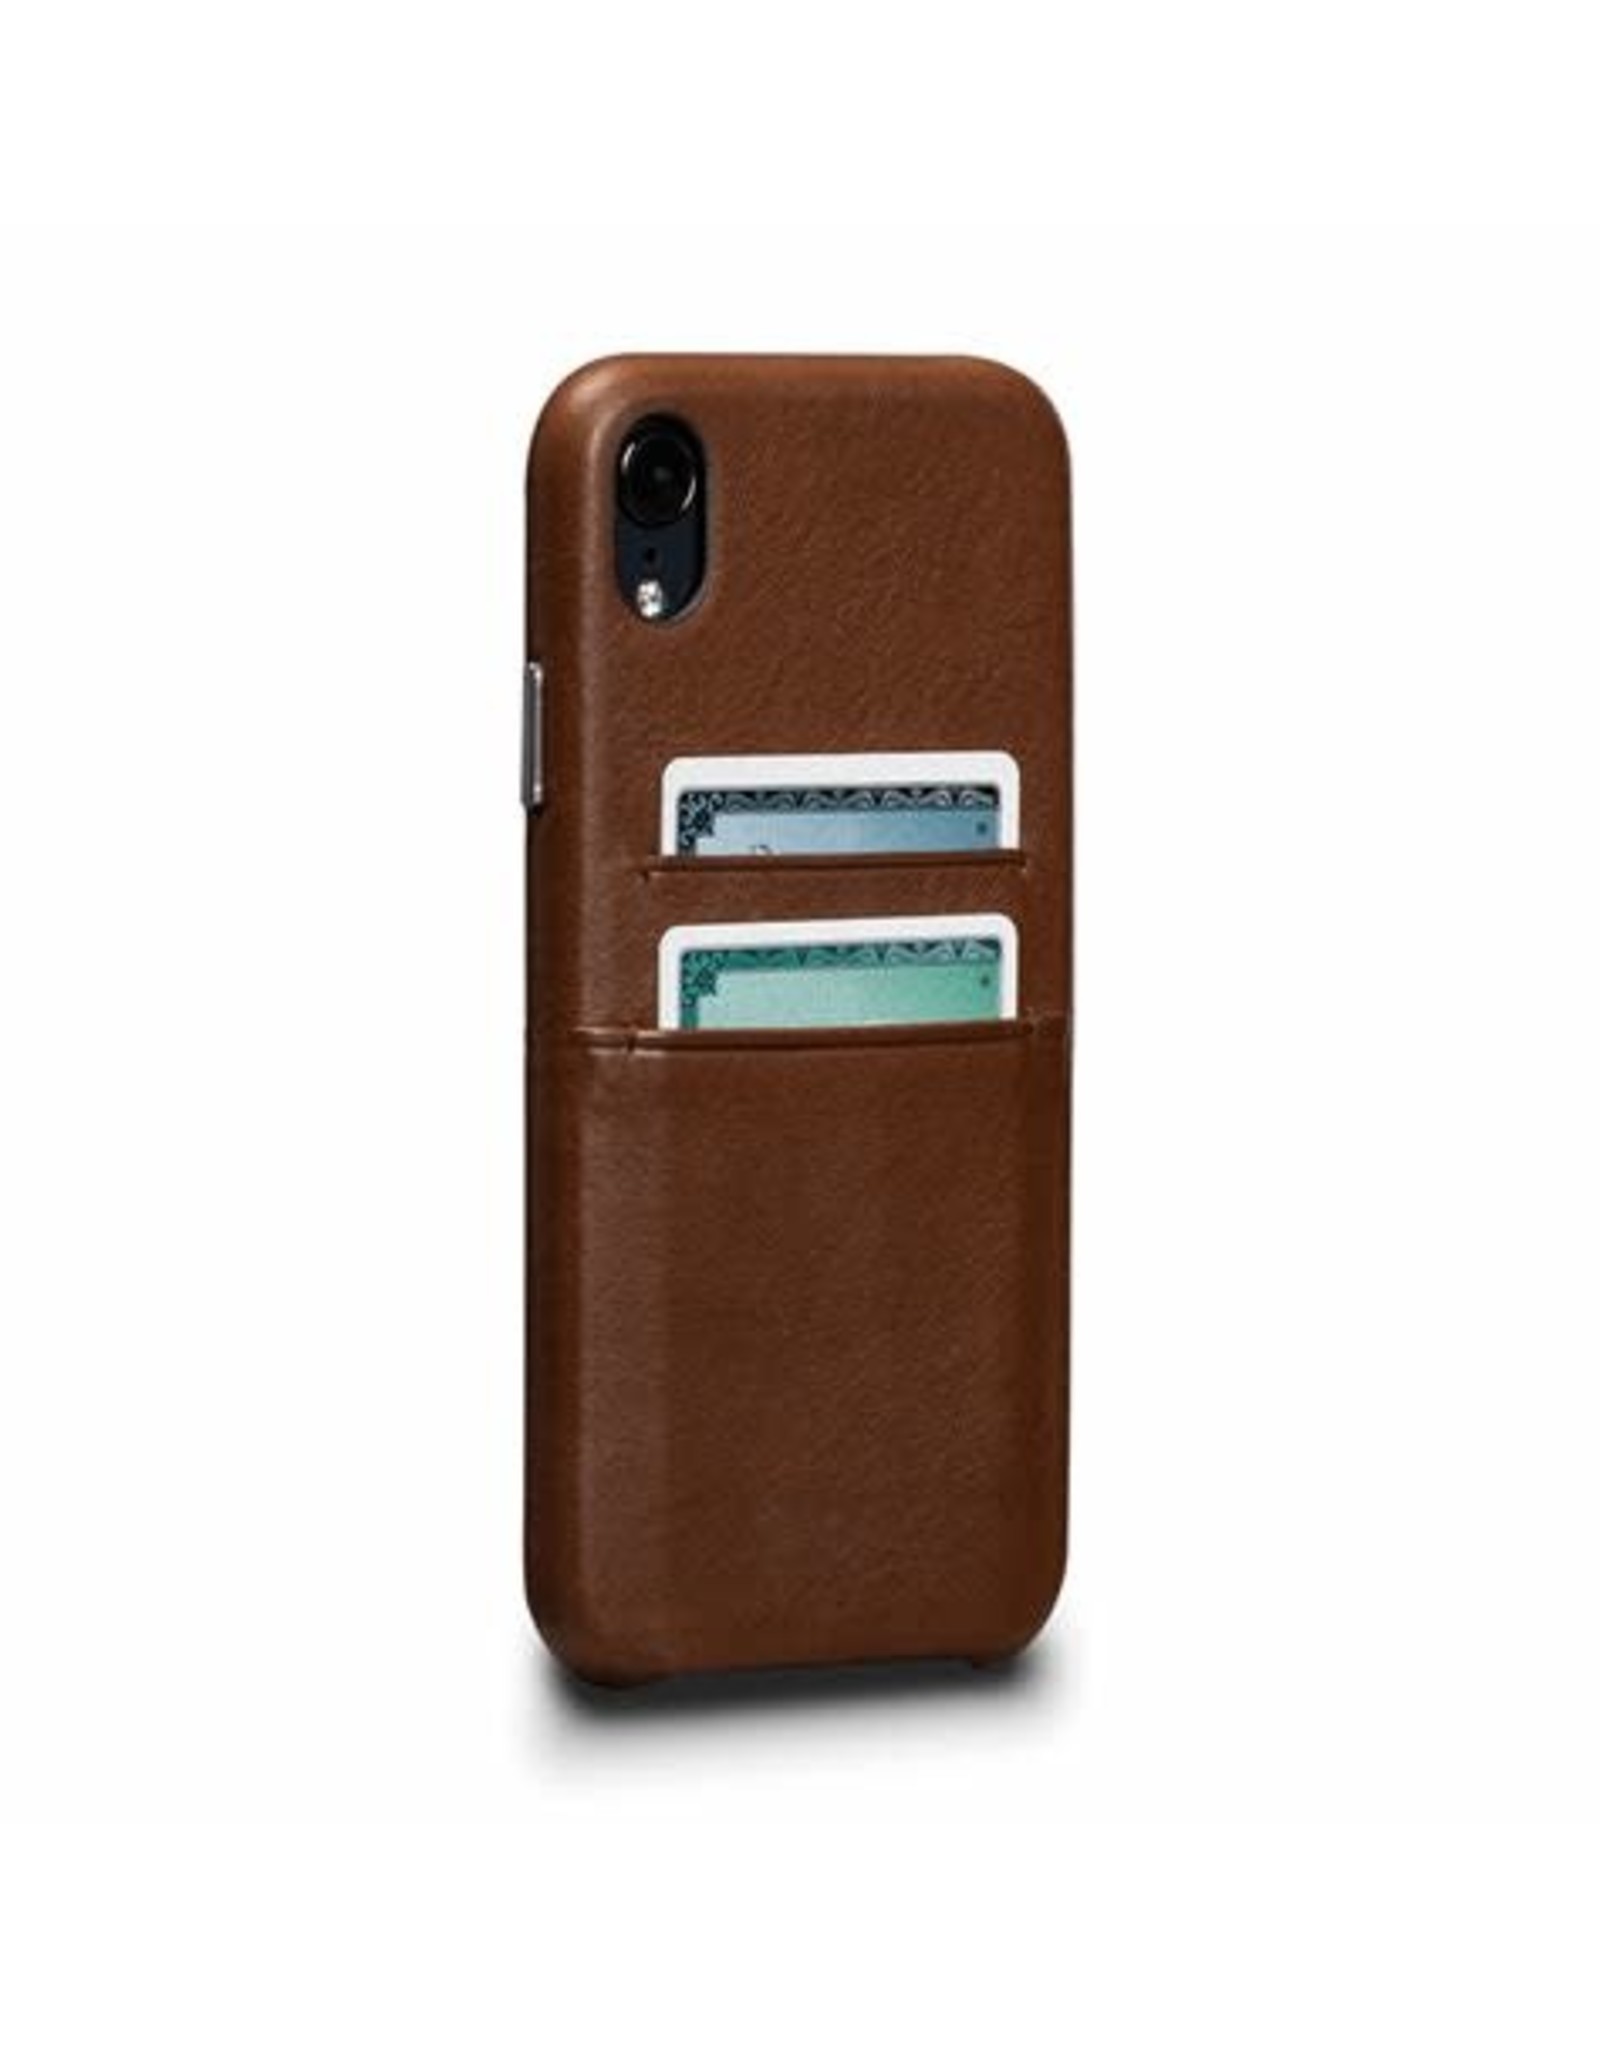 SENA Sena Bence Snap-on Leather Wallet case for iPhone X - Brown EOL